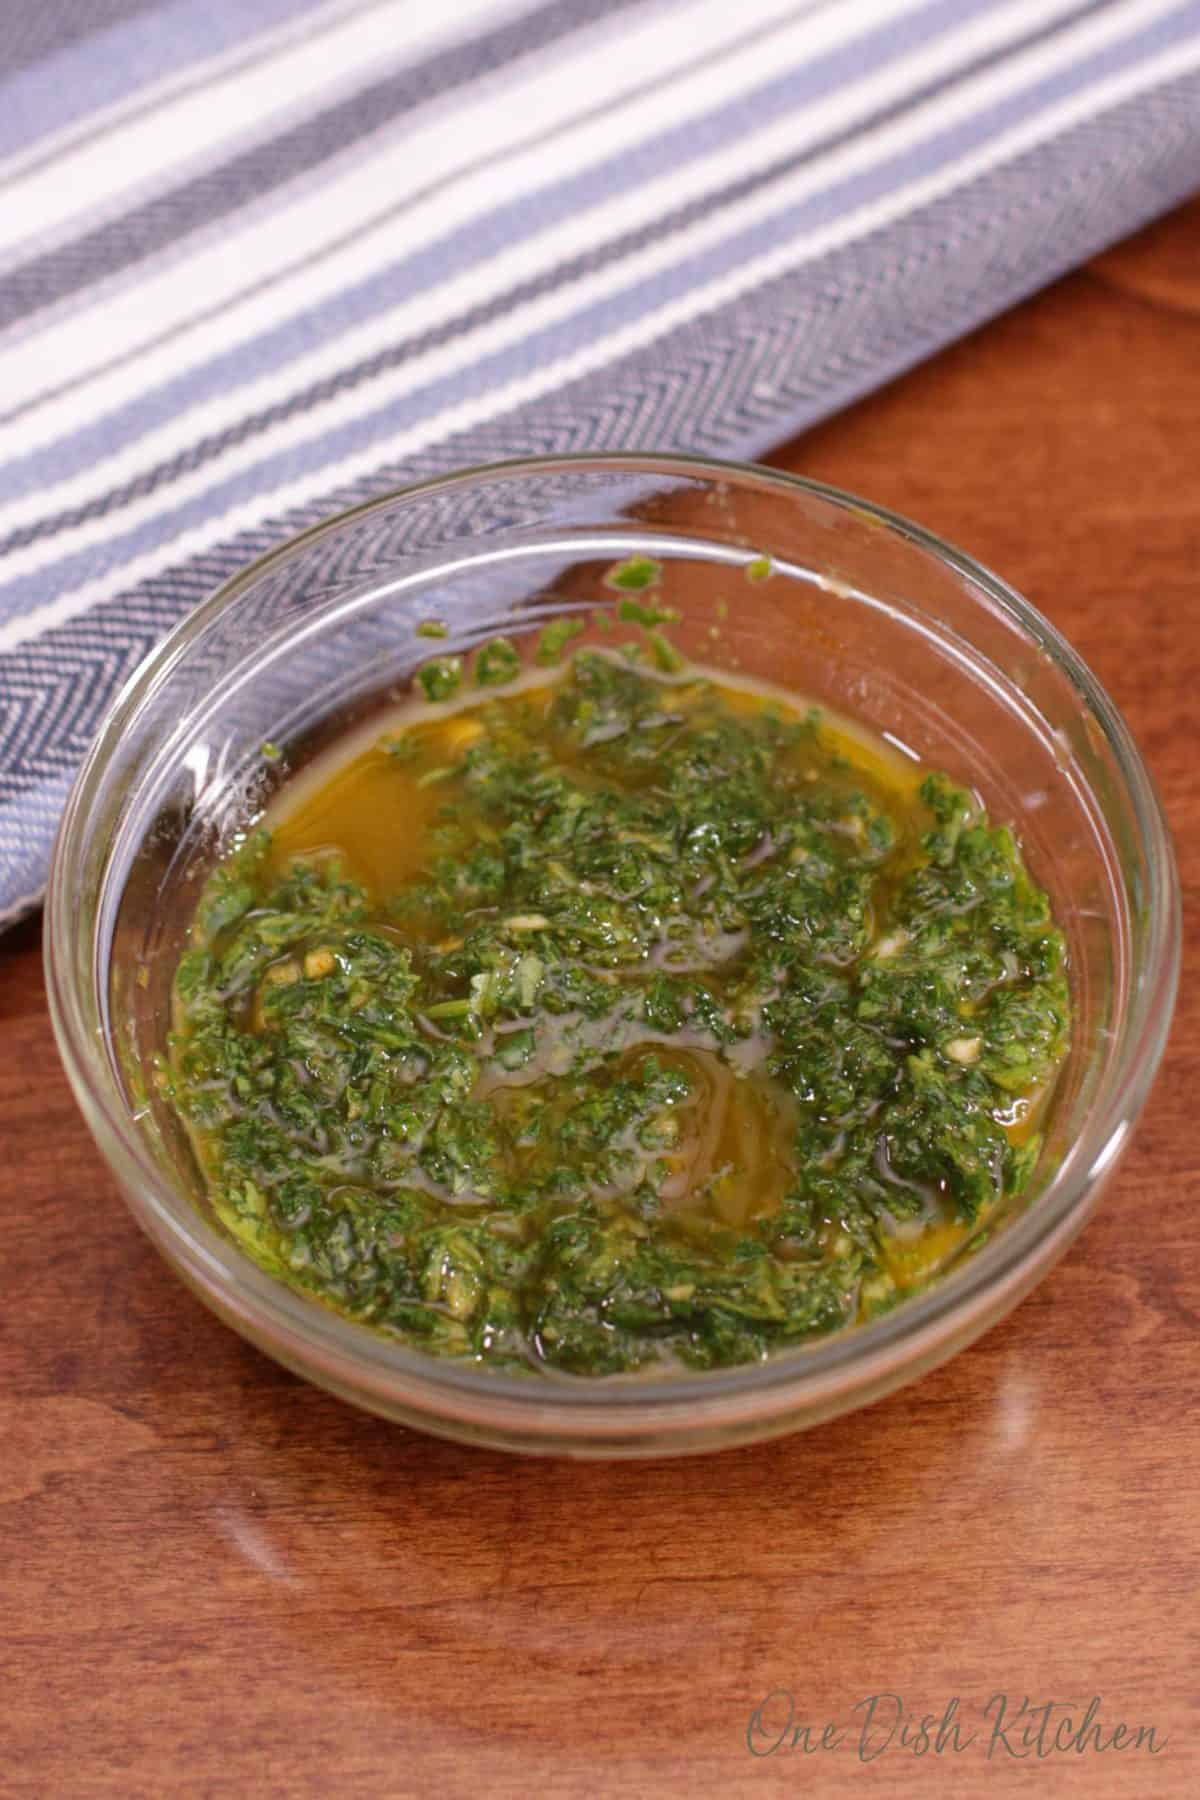 a bowl of chermoula on a brown table next to a blue and white kitchen towel.